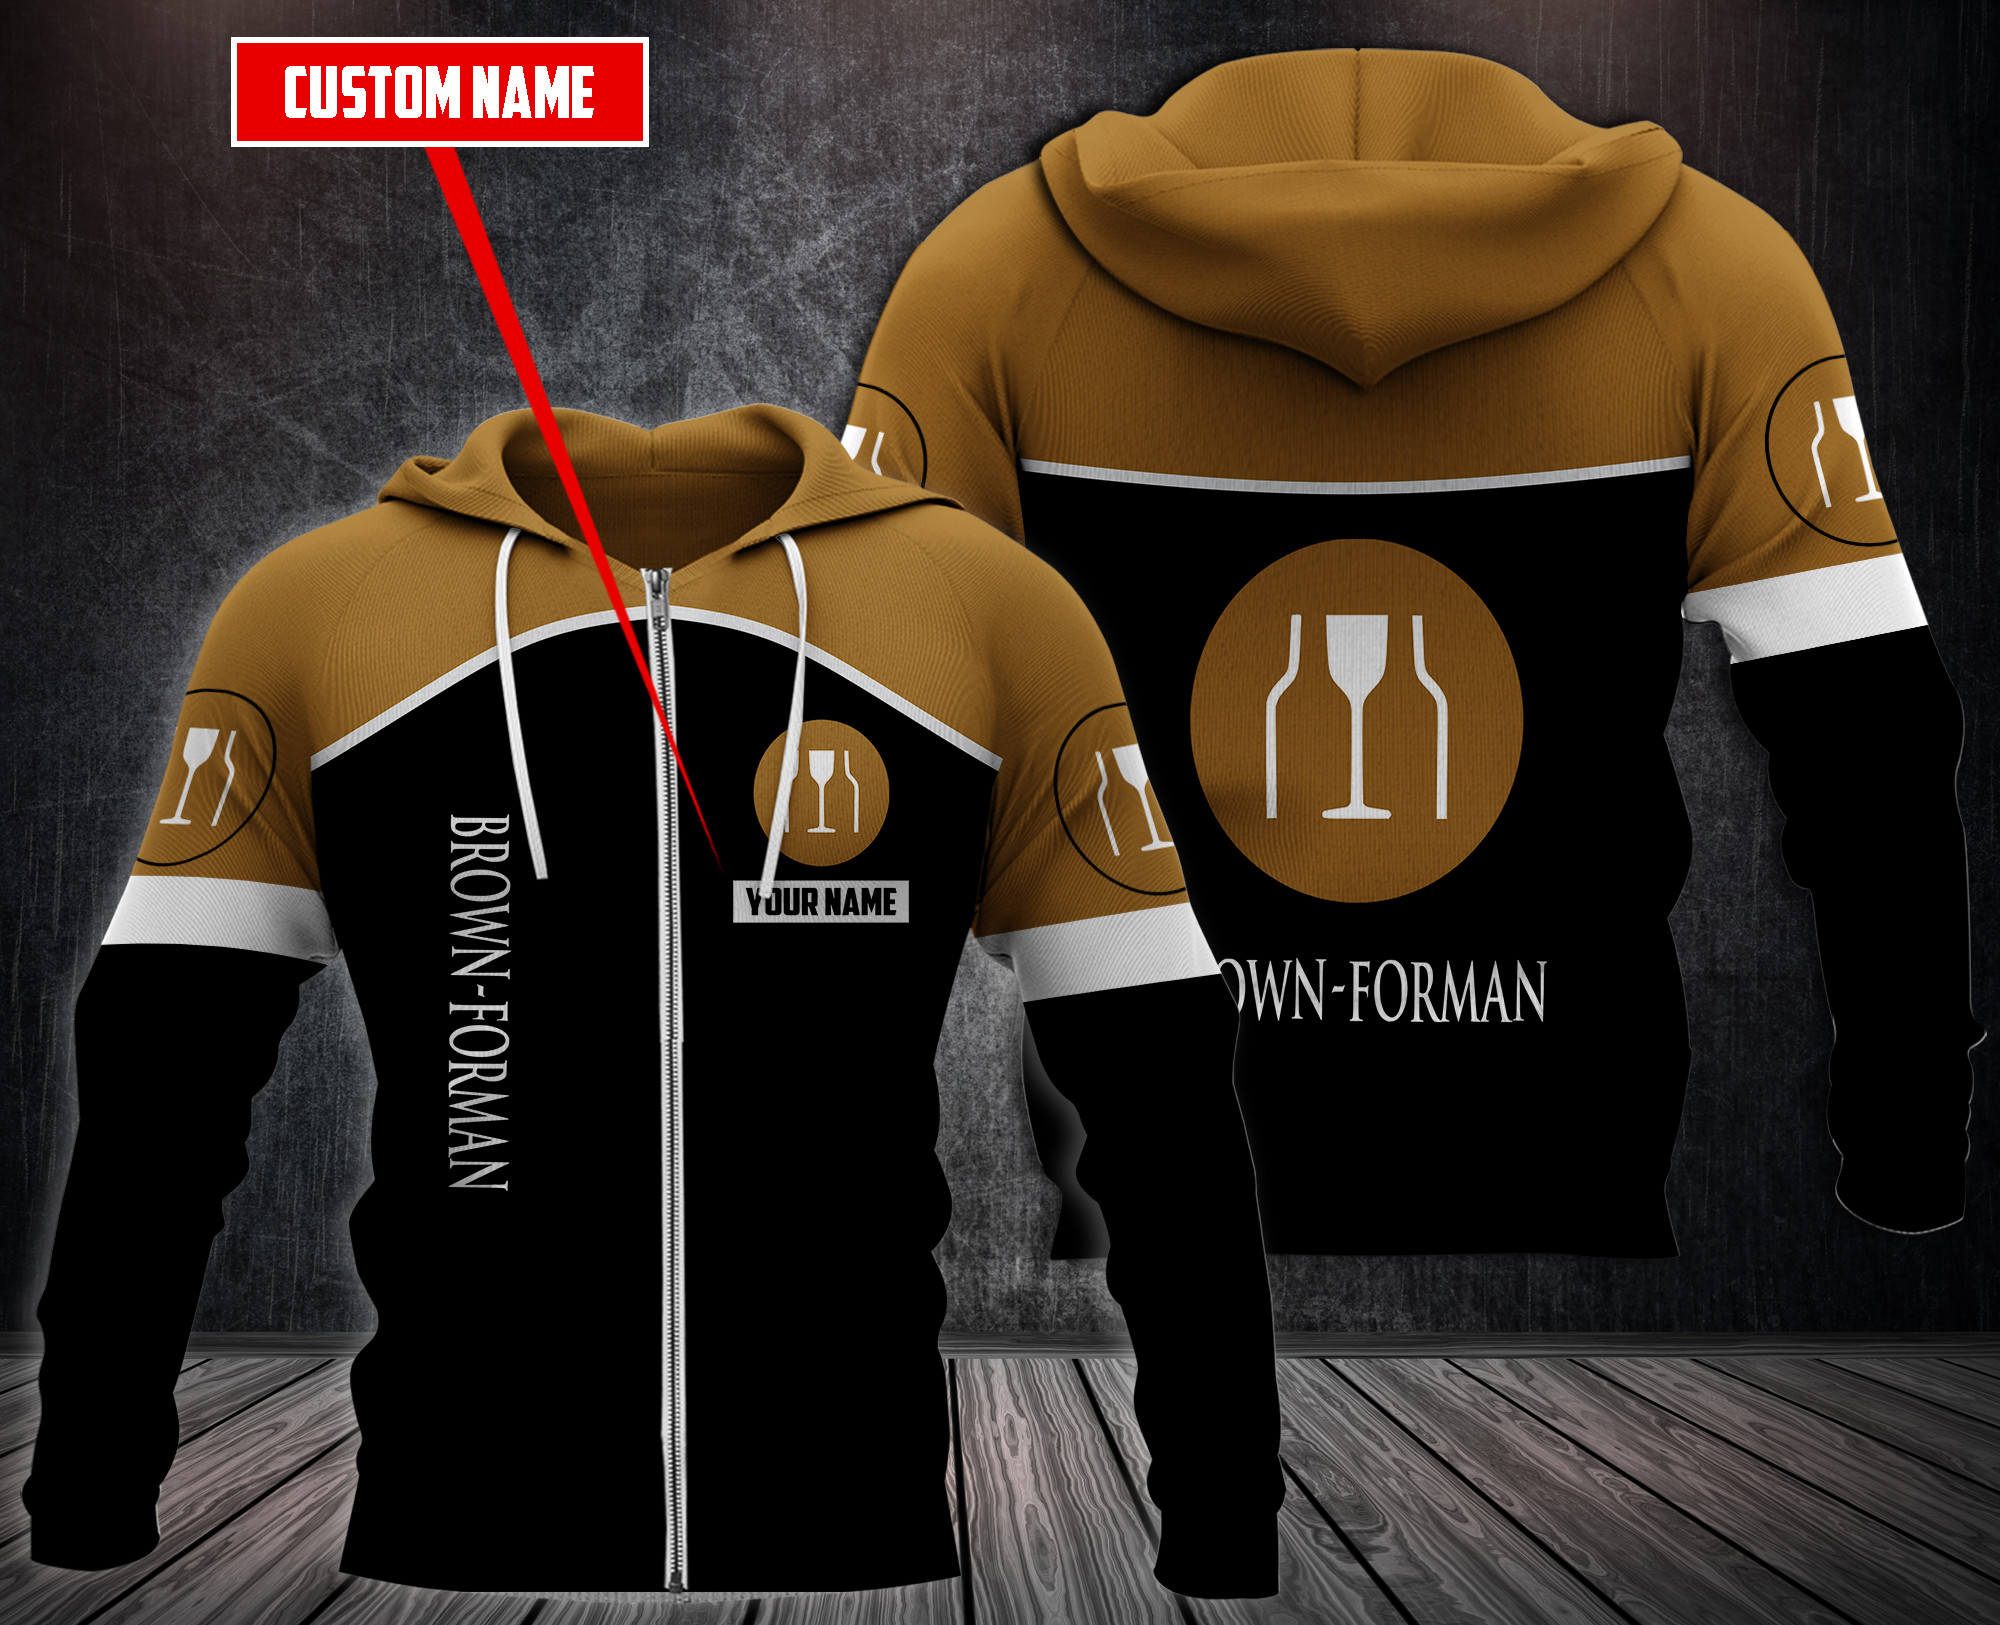 Choose the right hoodies for you on our boxboxshirt and ethershirt websites in 2022 88